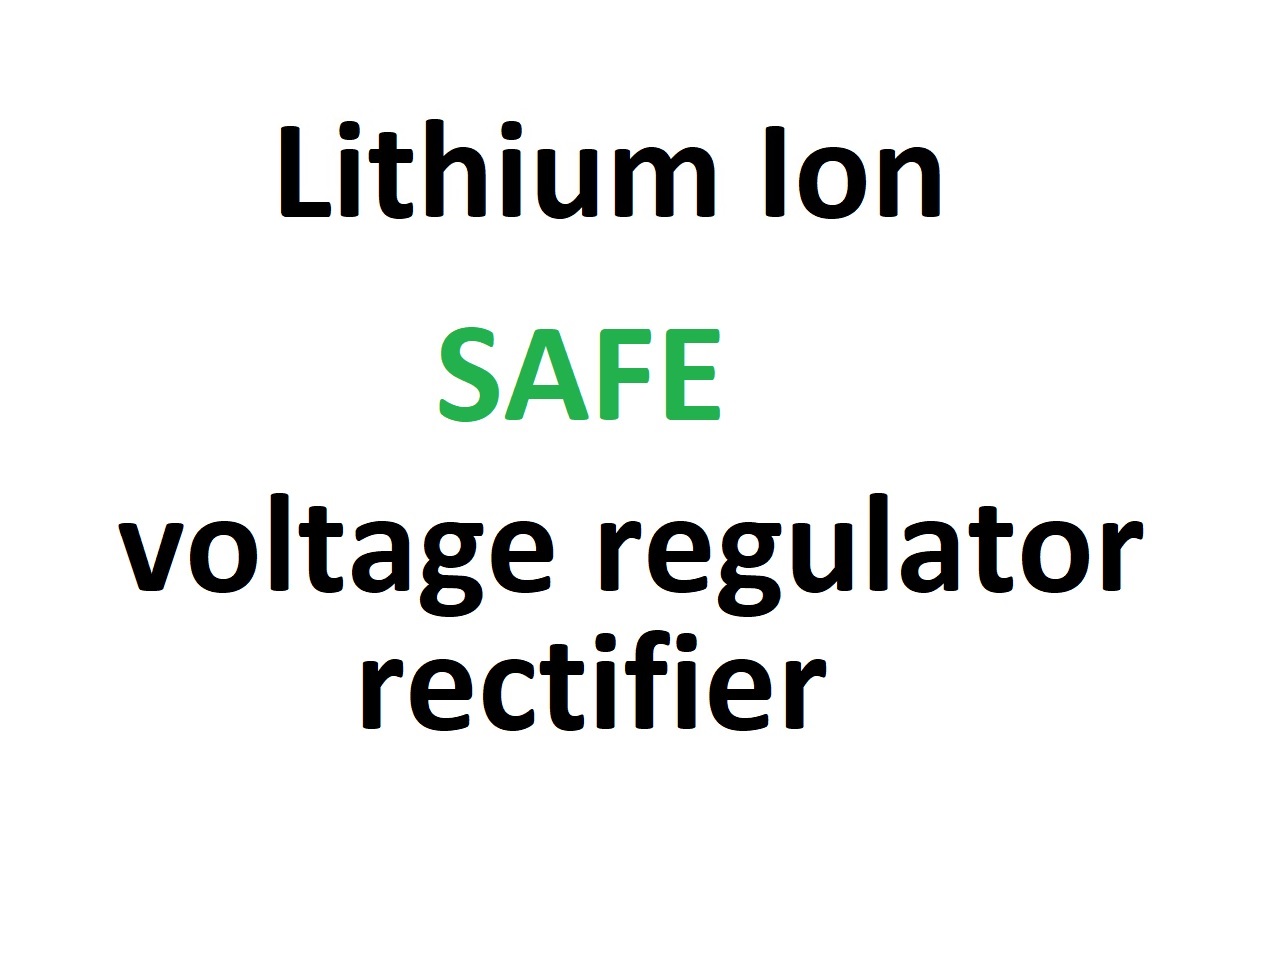 Regulator rectifier, also suitable for lithium ion batteries